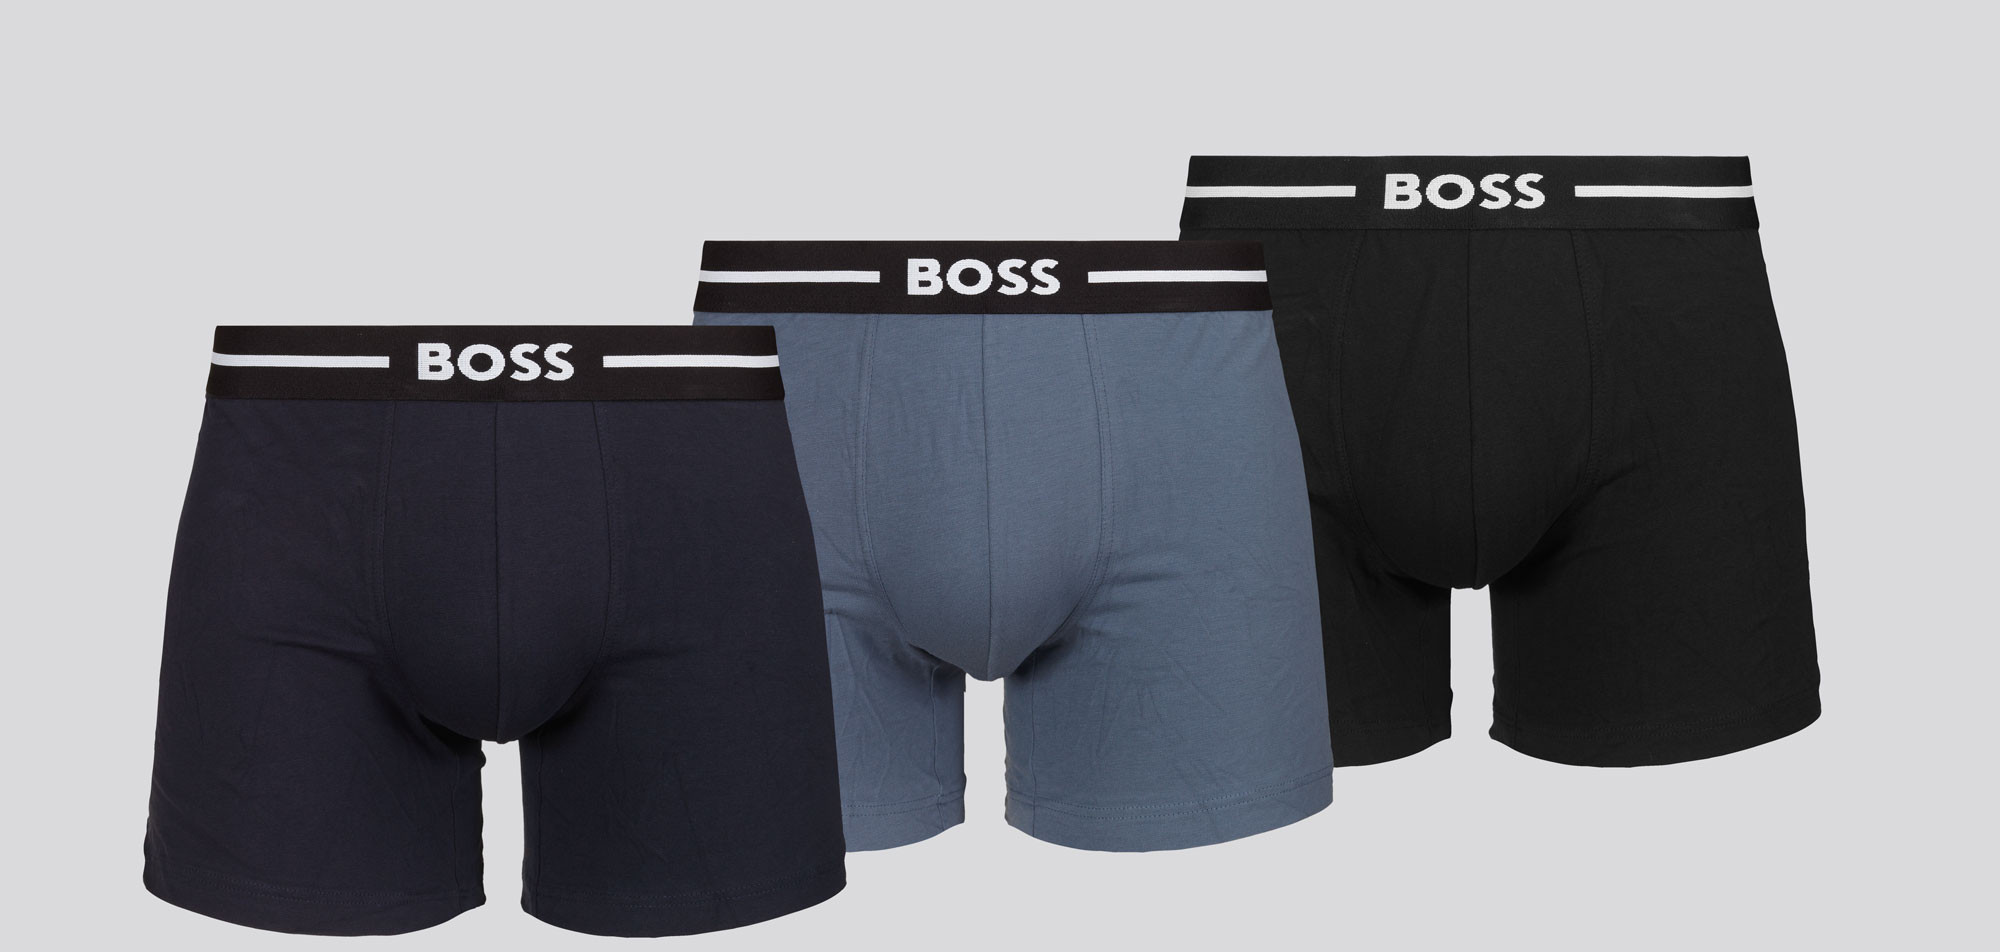 Boss Boxer Brief 3-Pack 621 Bold,